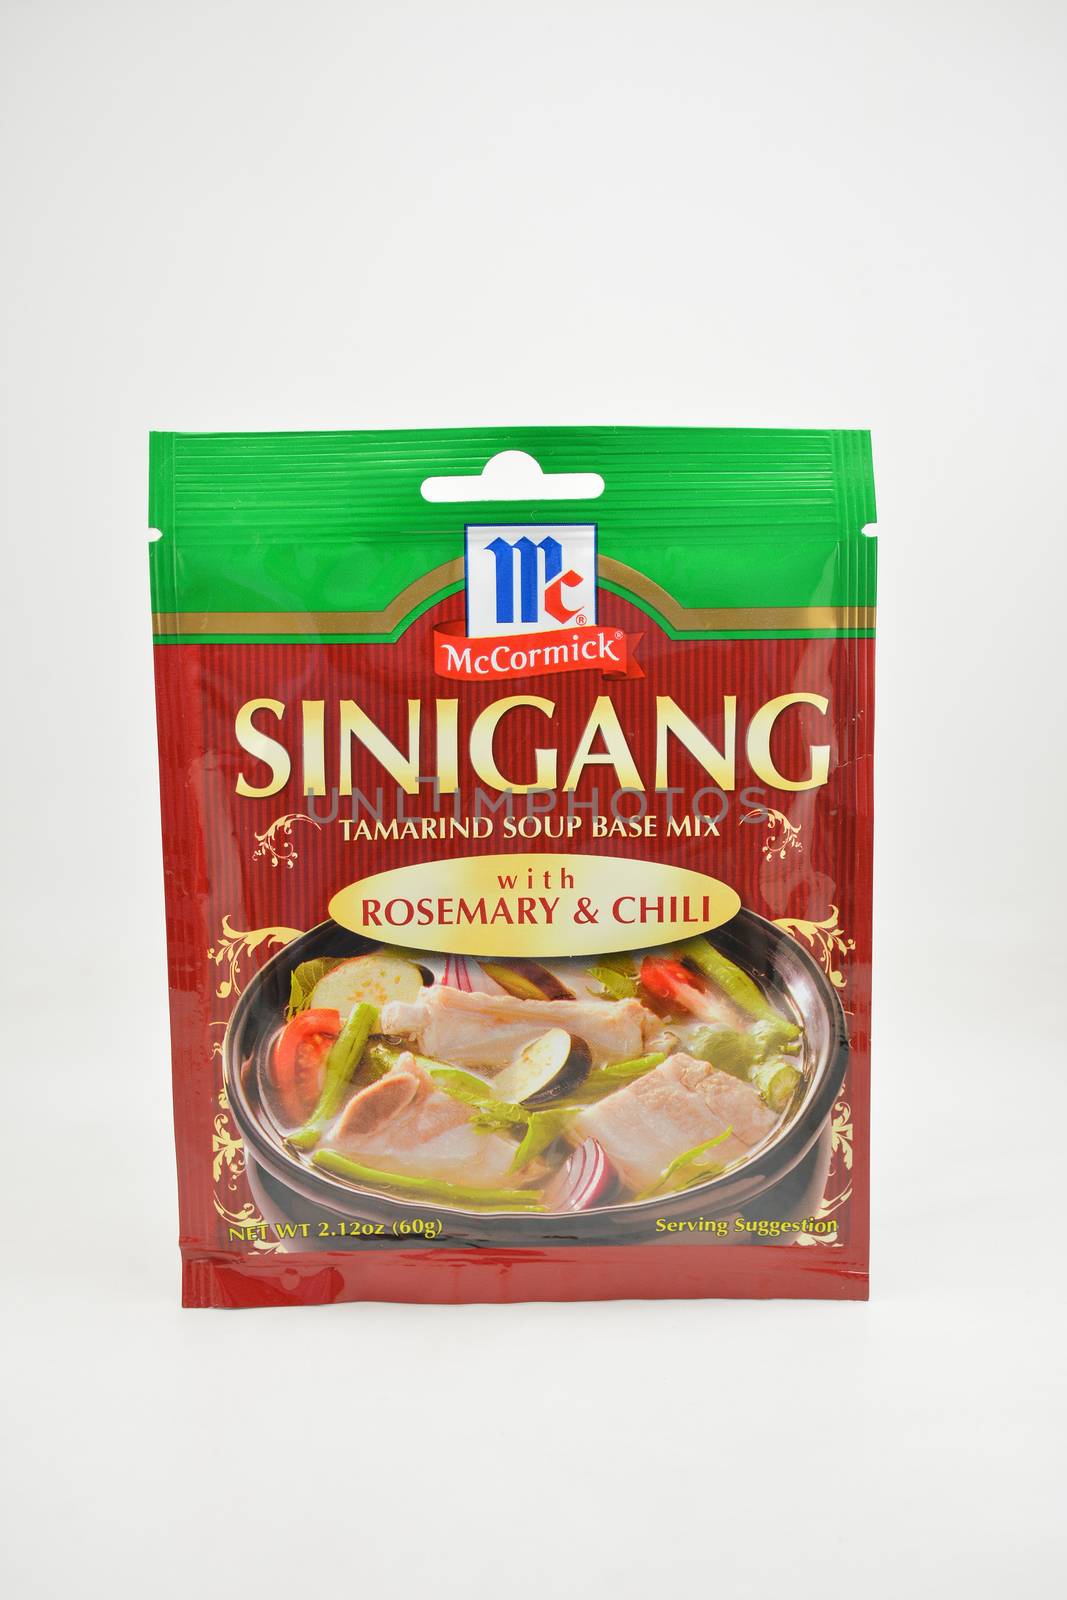 McCormick sinigang tamarind soup base mix with rosemary and chil by imwaltersy